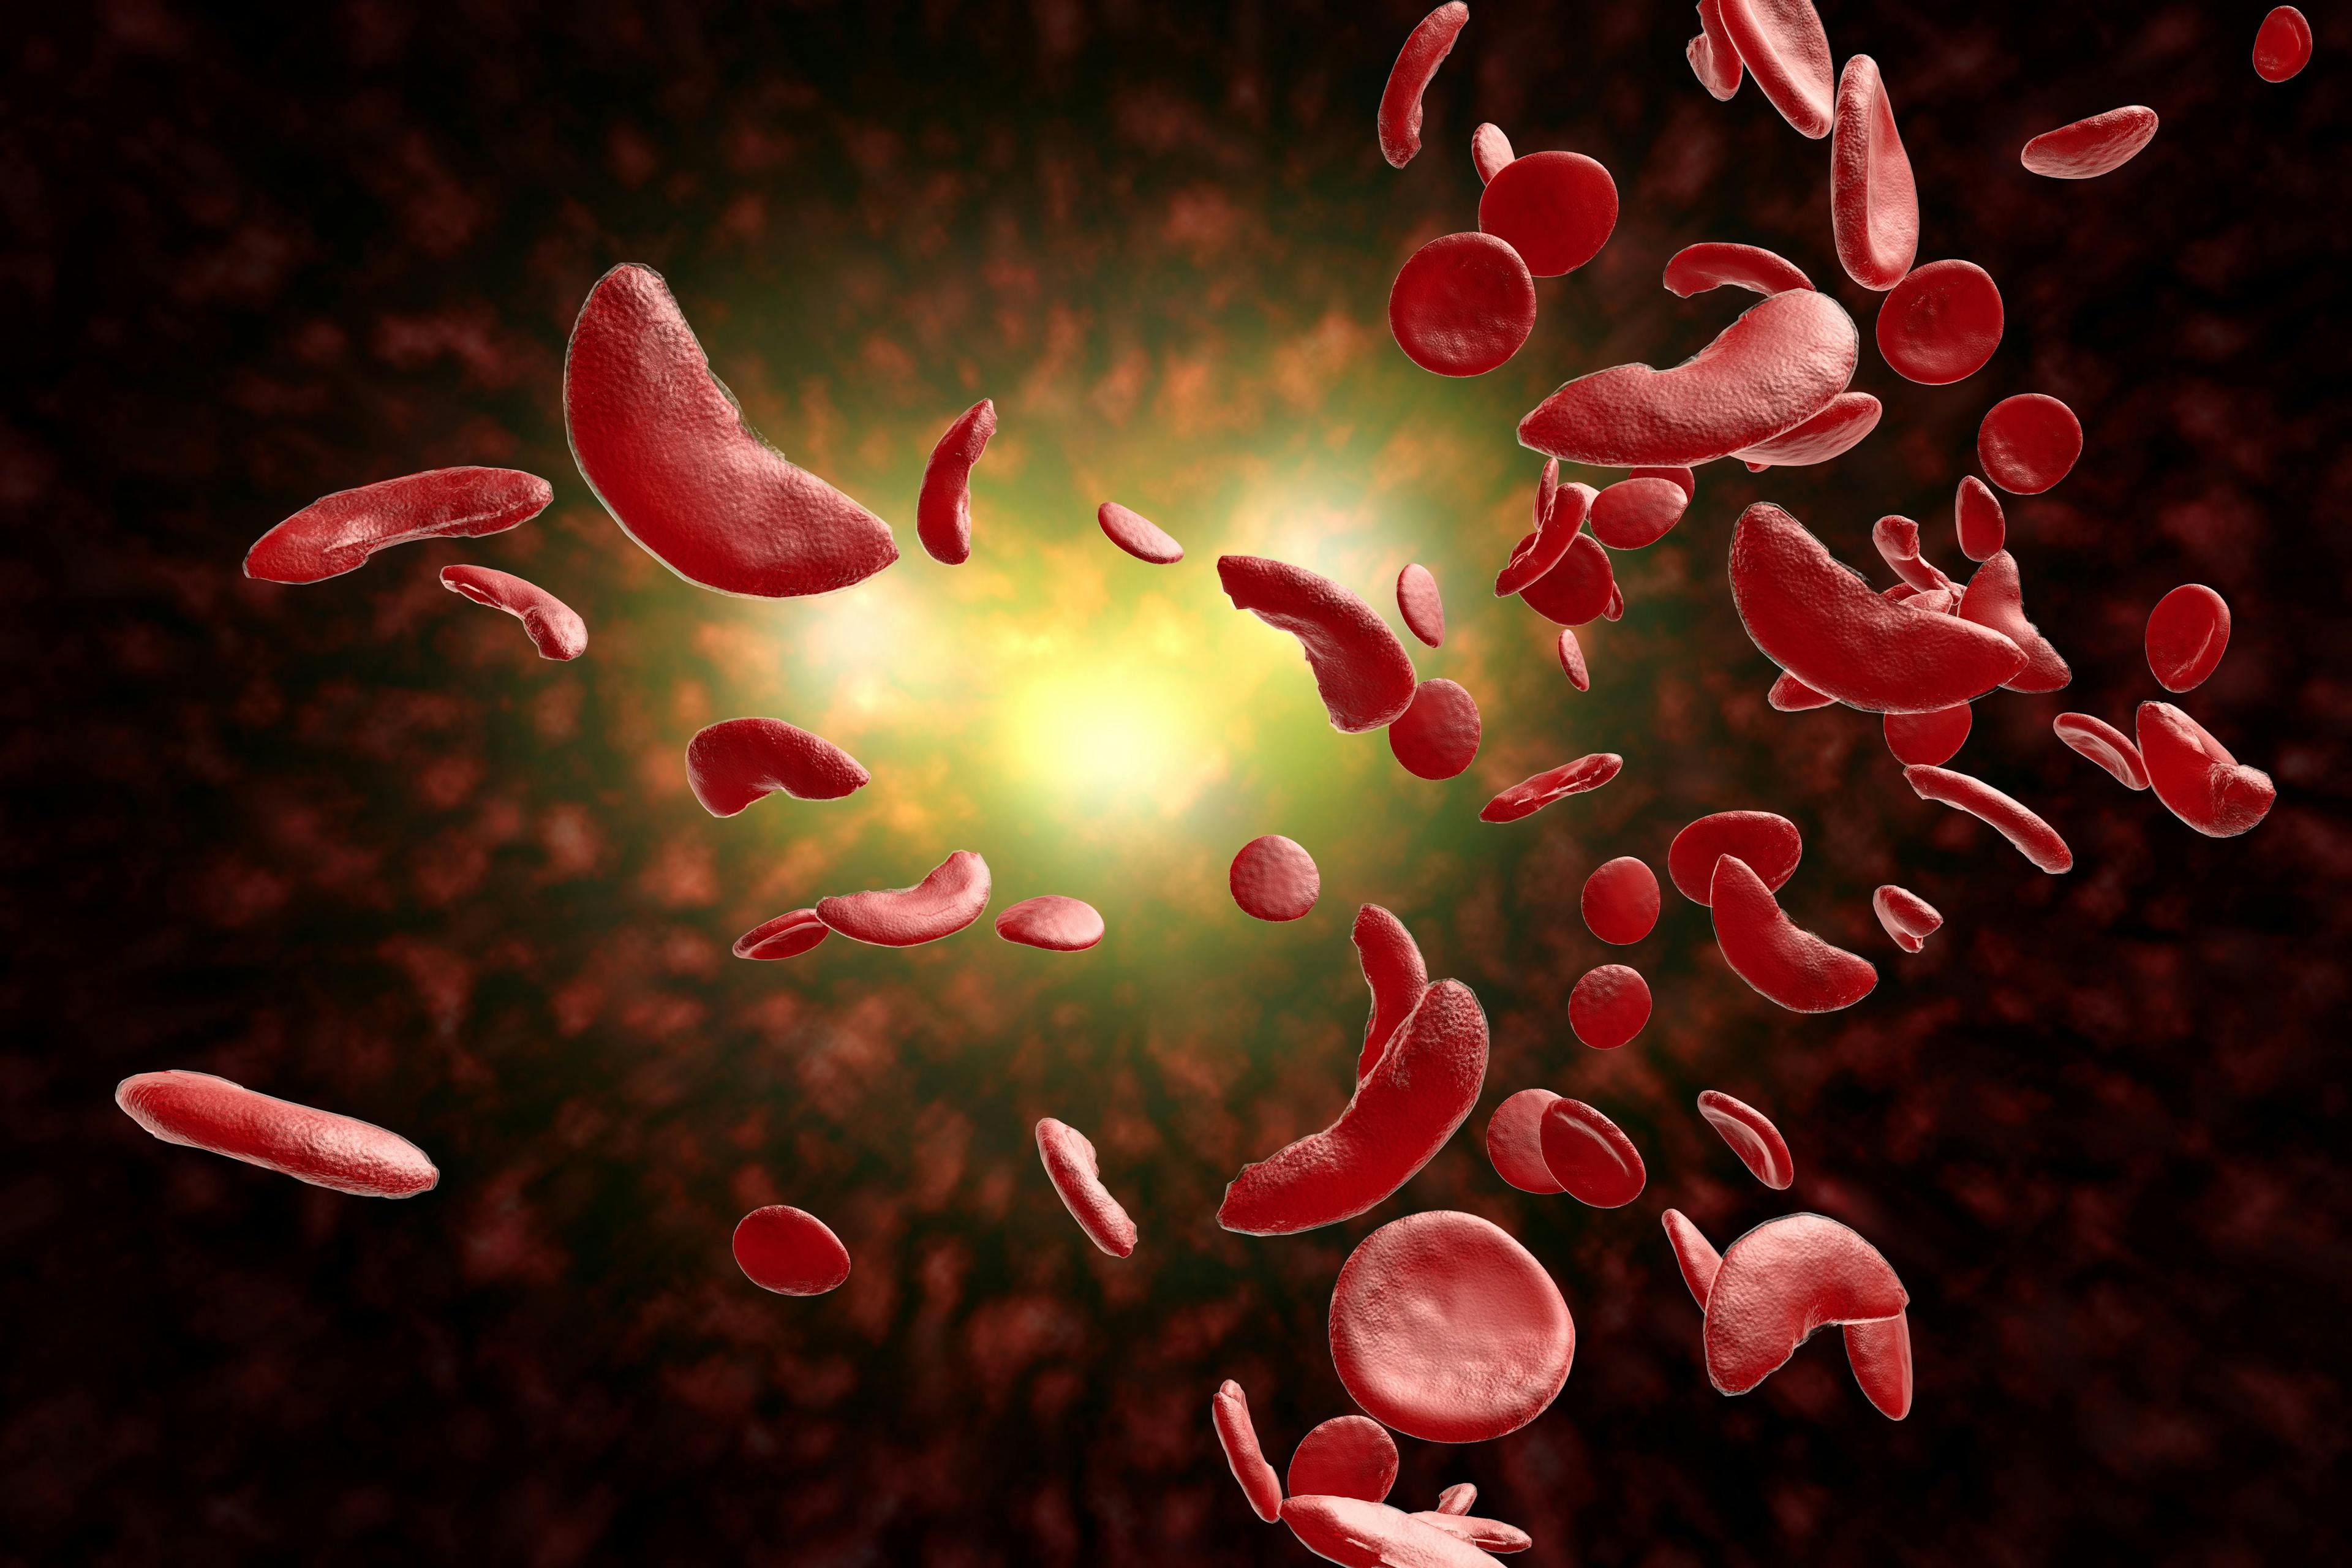 Sickle cell anemia | Image Credit: © Ezume Images - © Ezume Images - stock.adobe.com.